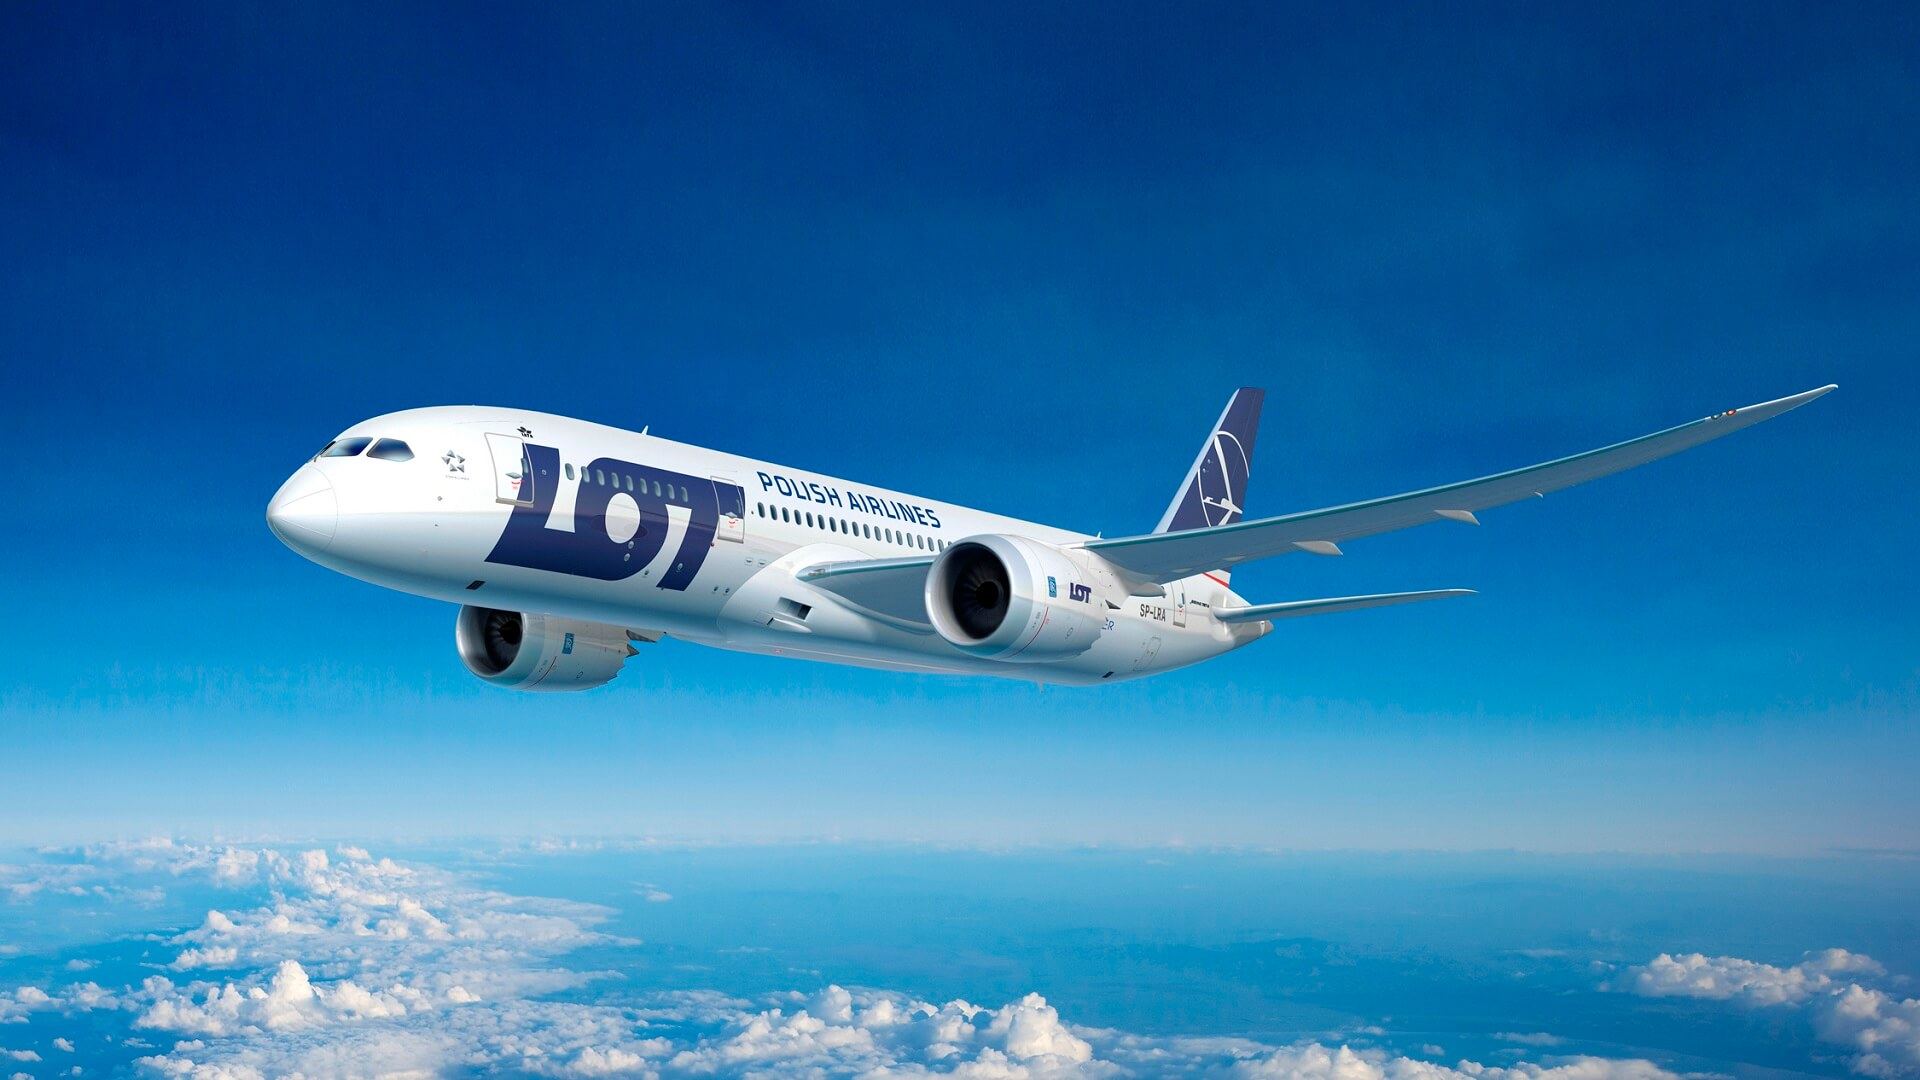 LOT Polish Airlines to launch flights on Warsaw-Tashkent route